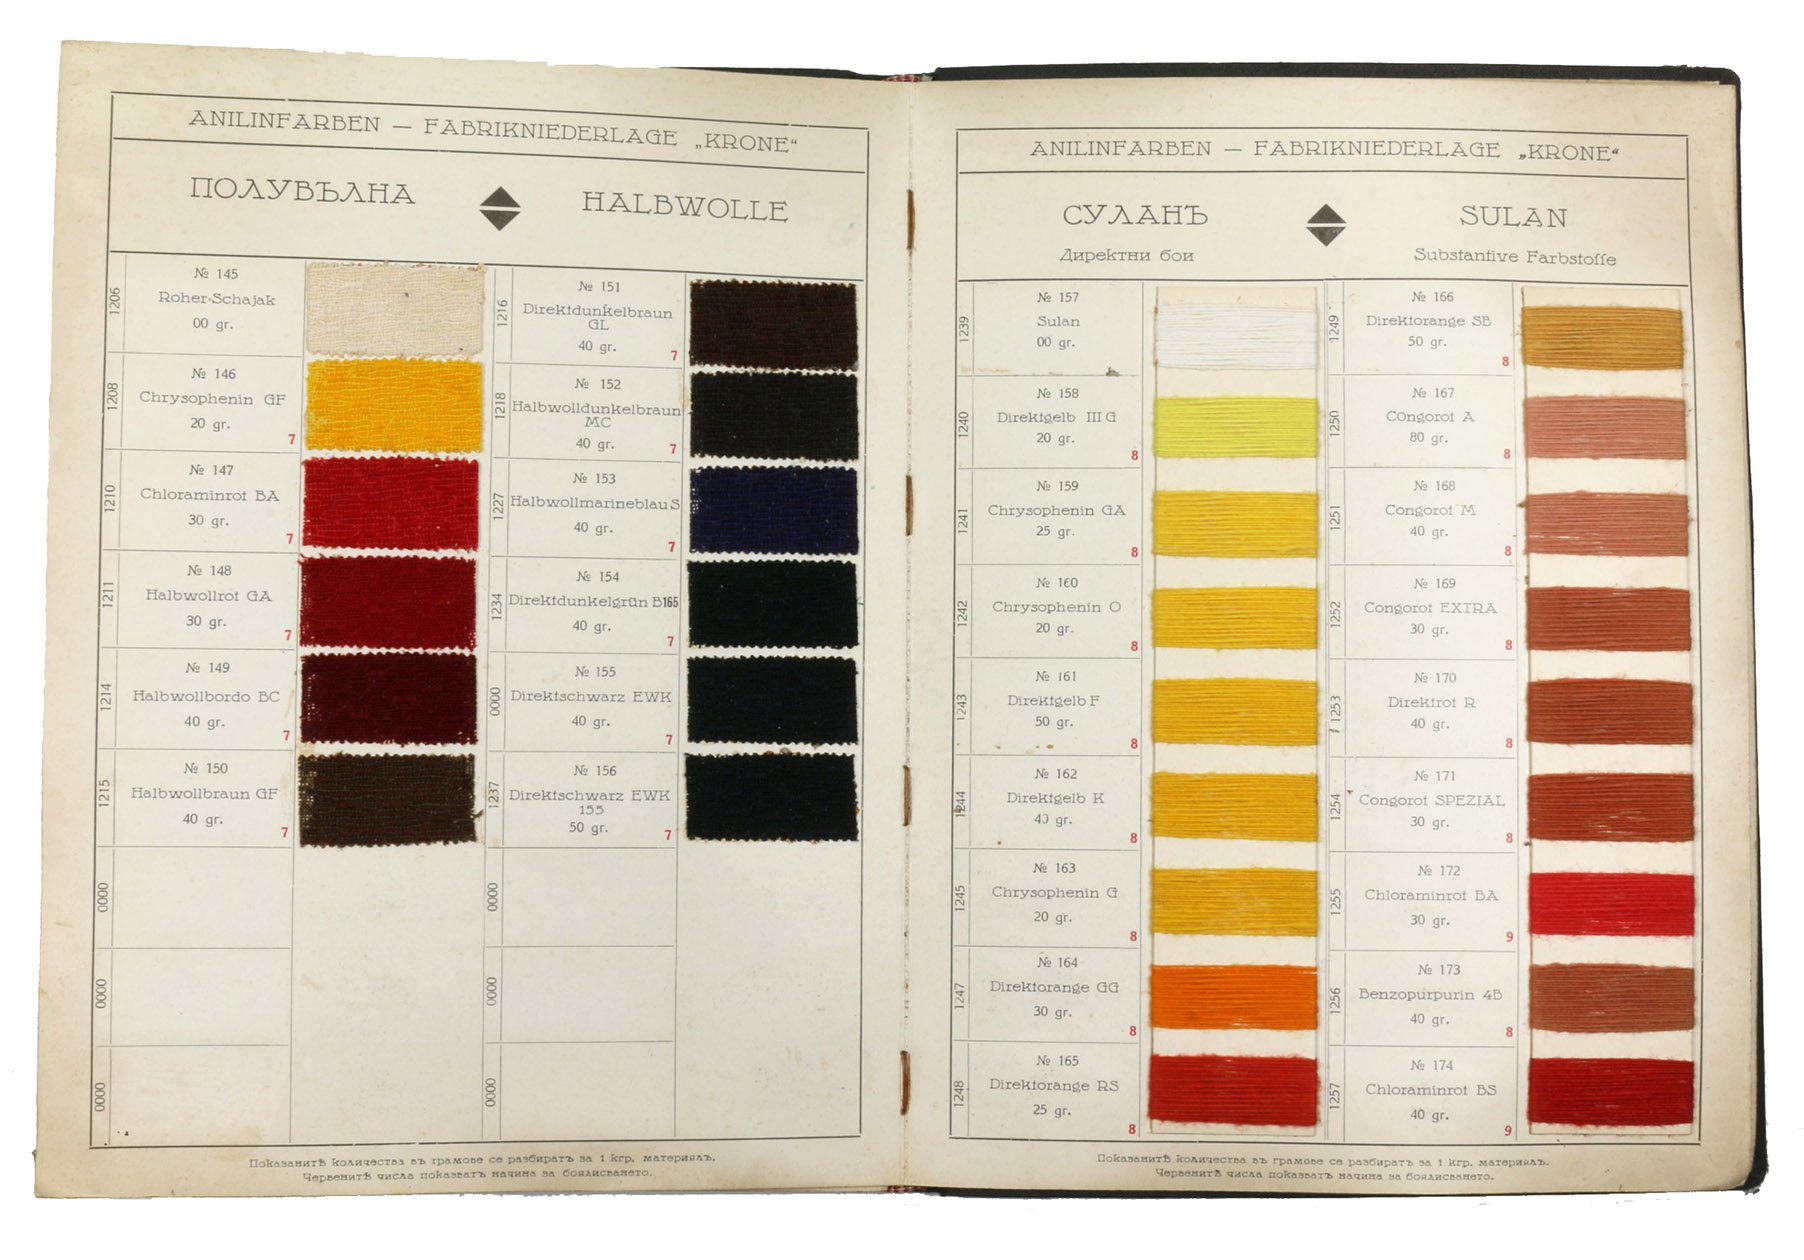 [FABRICS - NATIONAL SOCIALISM - KRONE]. - Anilinovi boi za vulna, poluvulna, pamuku i izk[ustvena] koprina. [Aniline dyes for wool, blended wool fabric and cotton].Sofia & Cherven Bryag, Alexander & Stoyan P. Darakchiev, [1938?]. With 256 well-preserved wool yarn and fabric samples showing a wide range of colours of aniline dyes, solidly mounted on thick cardboard. Original publishers gold-stamped black cloth with the Krone logo on the front board and title and publisher on the front board and spine.